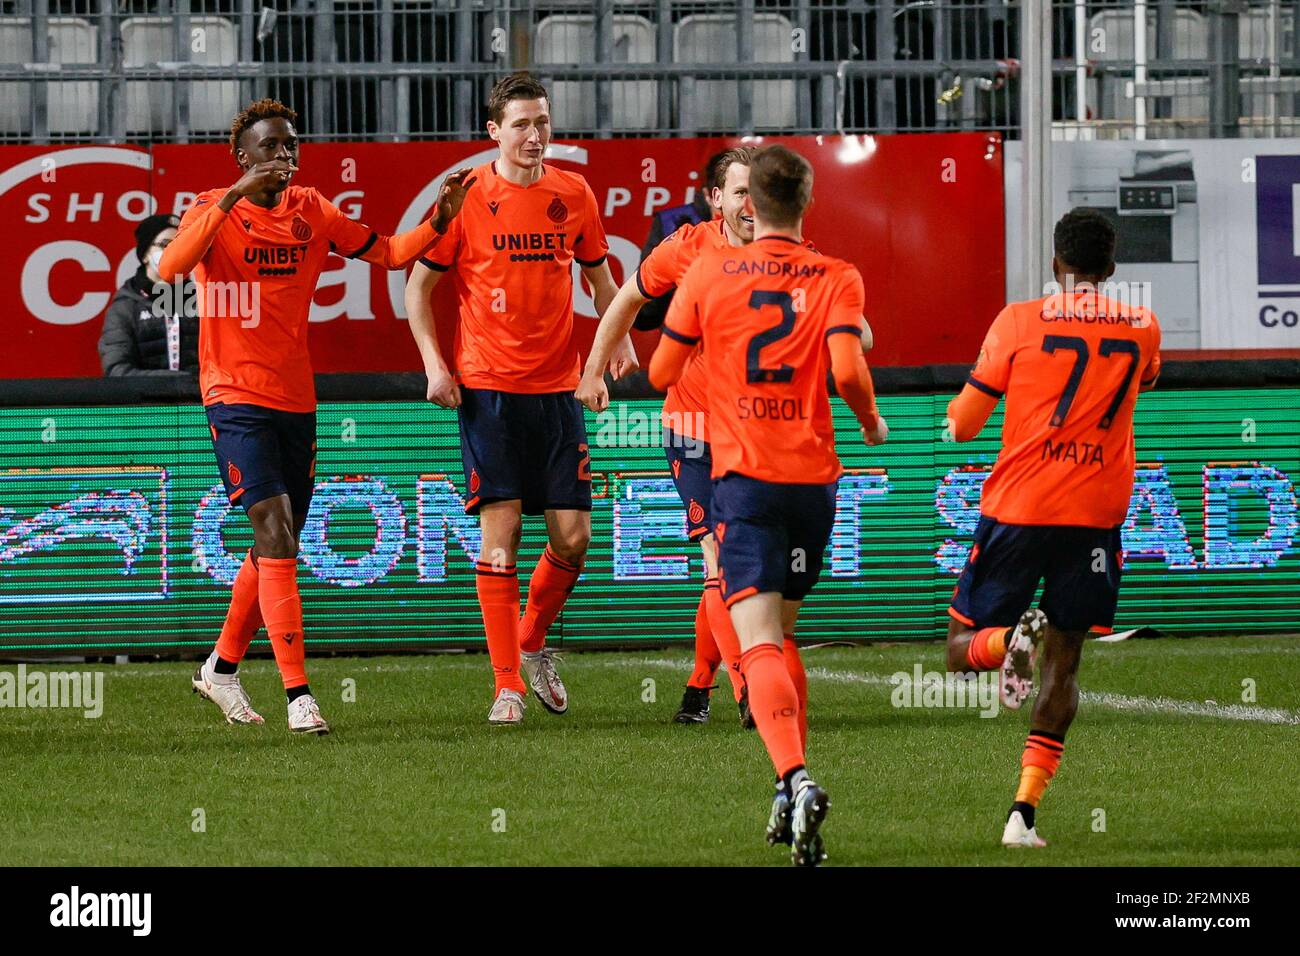 Club's players celebrate during a postponed soccer match between Sporting Charleroi and Club Brugge KV, Friday 12 March 2021 in Charleroi, of day 26 o Stock Photo